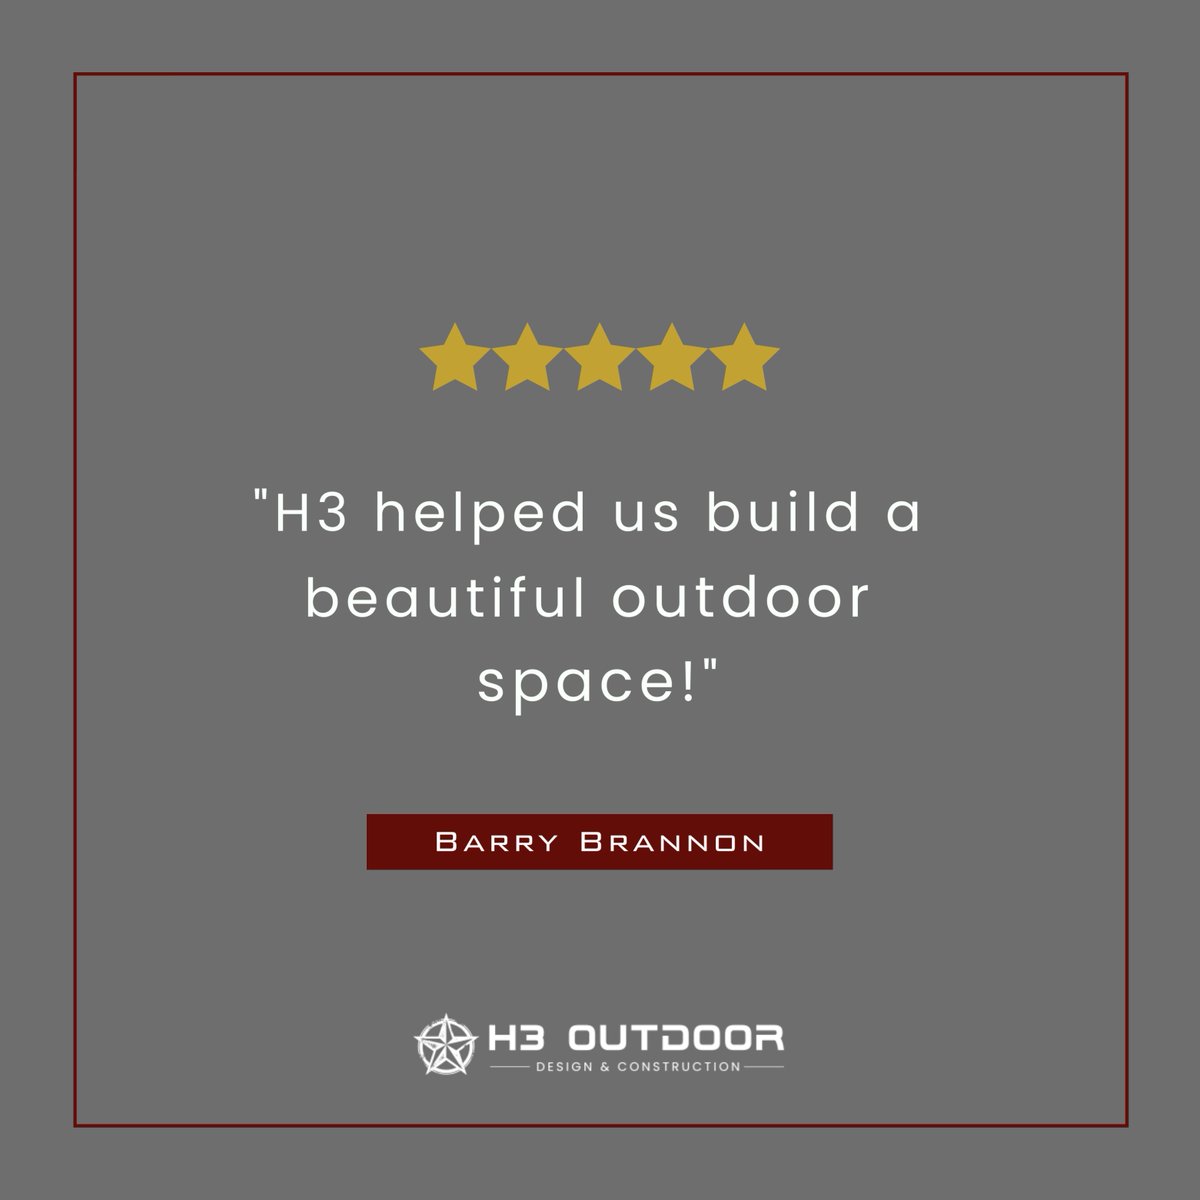 Thanks, Barry for your review of your new outdoor space by H3 Outdoor Design. We're so glad to have been part of your transformation! 😊
For more reviews, visit h3outdoordesign.com/reviews/ 
#H3OutdoorDesign #PatioDesign #5Stars